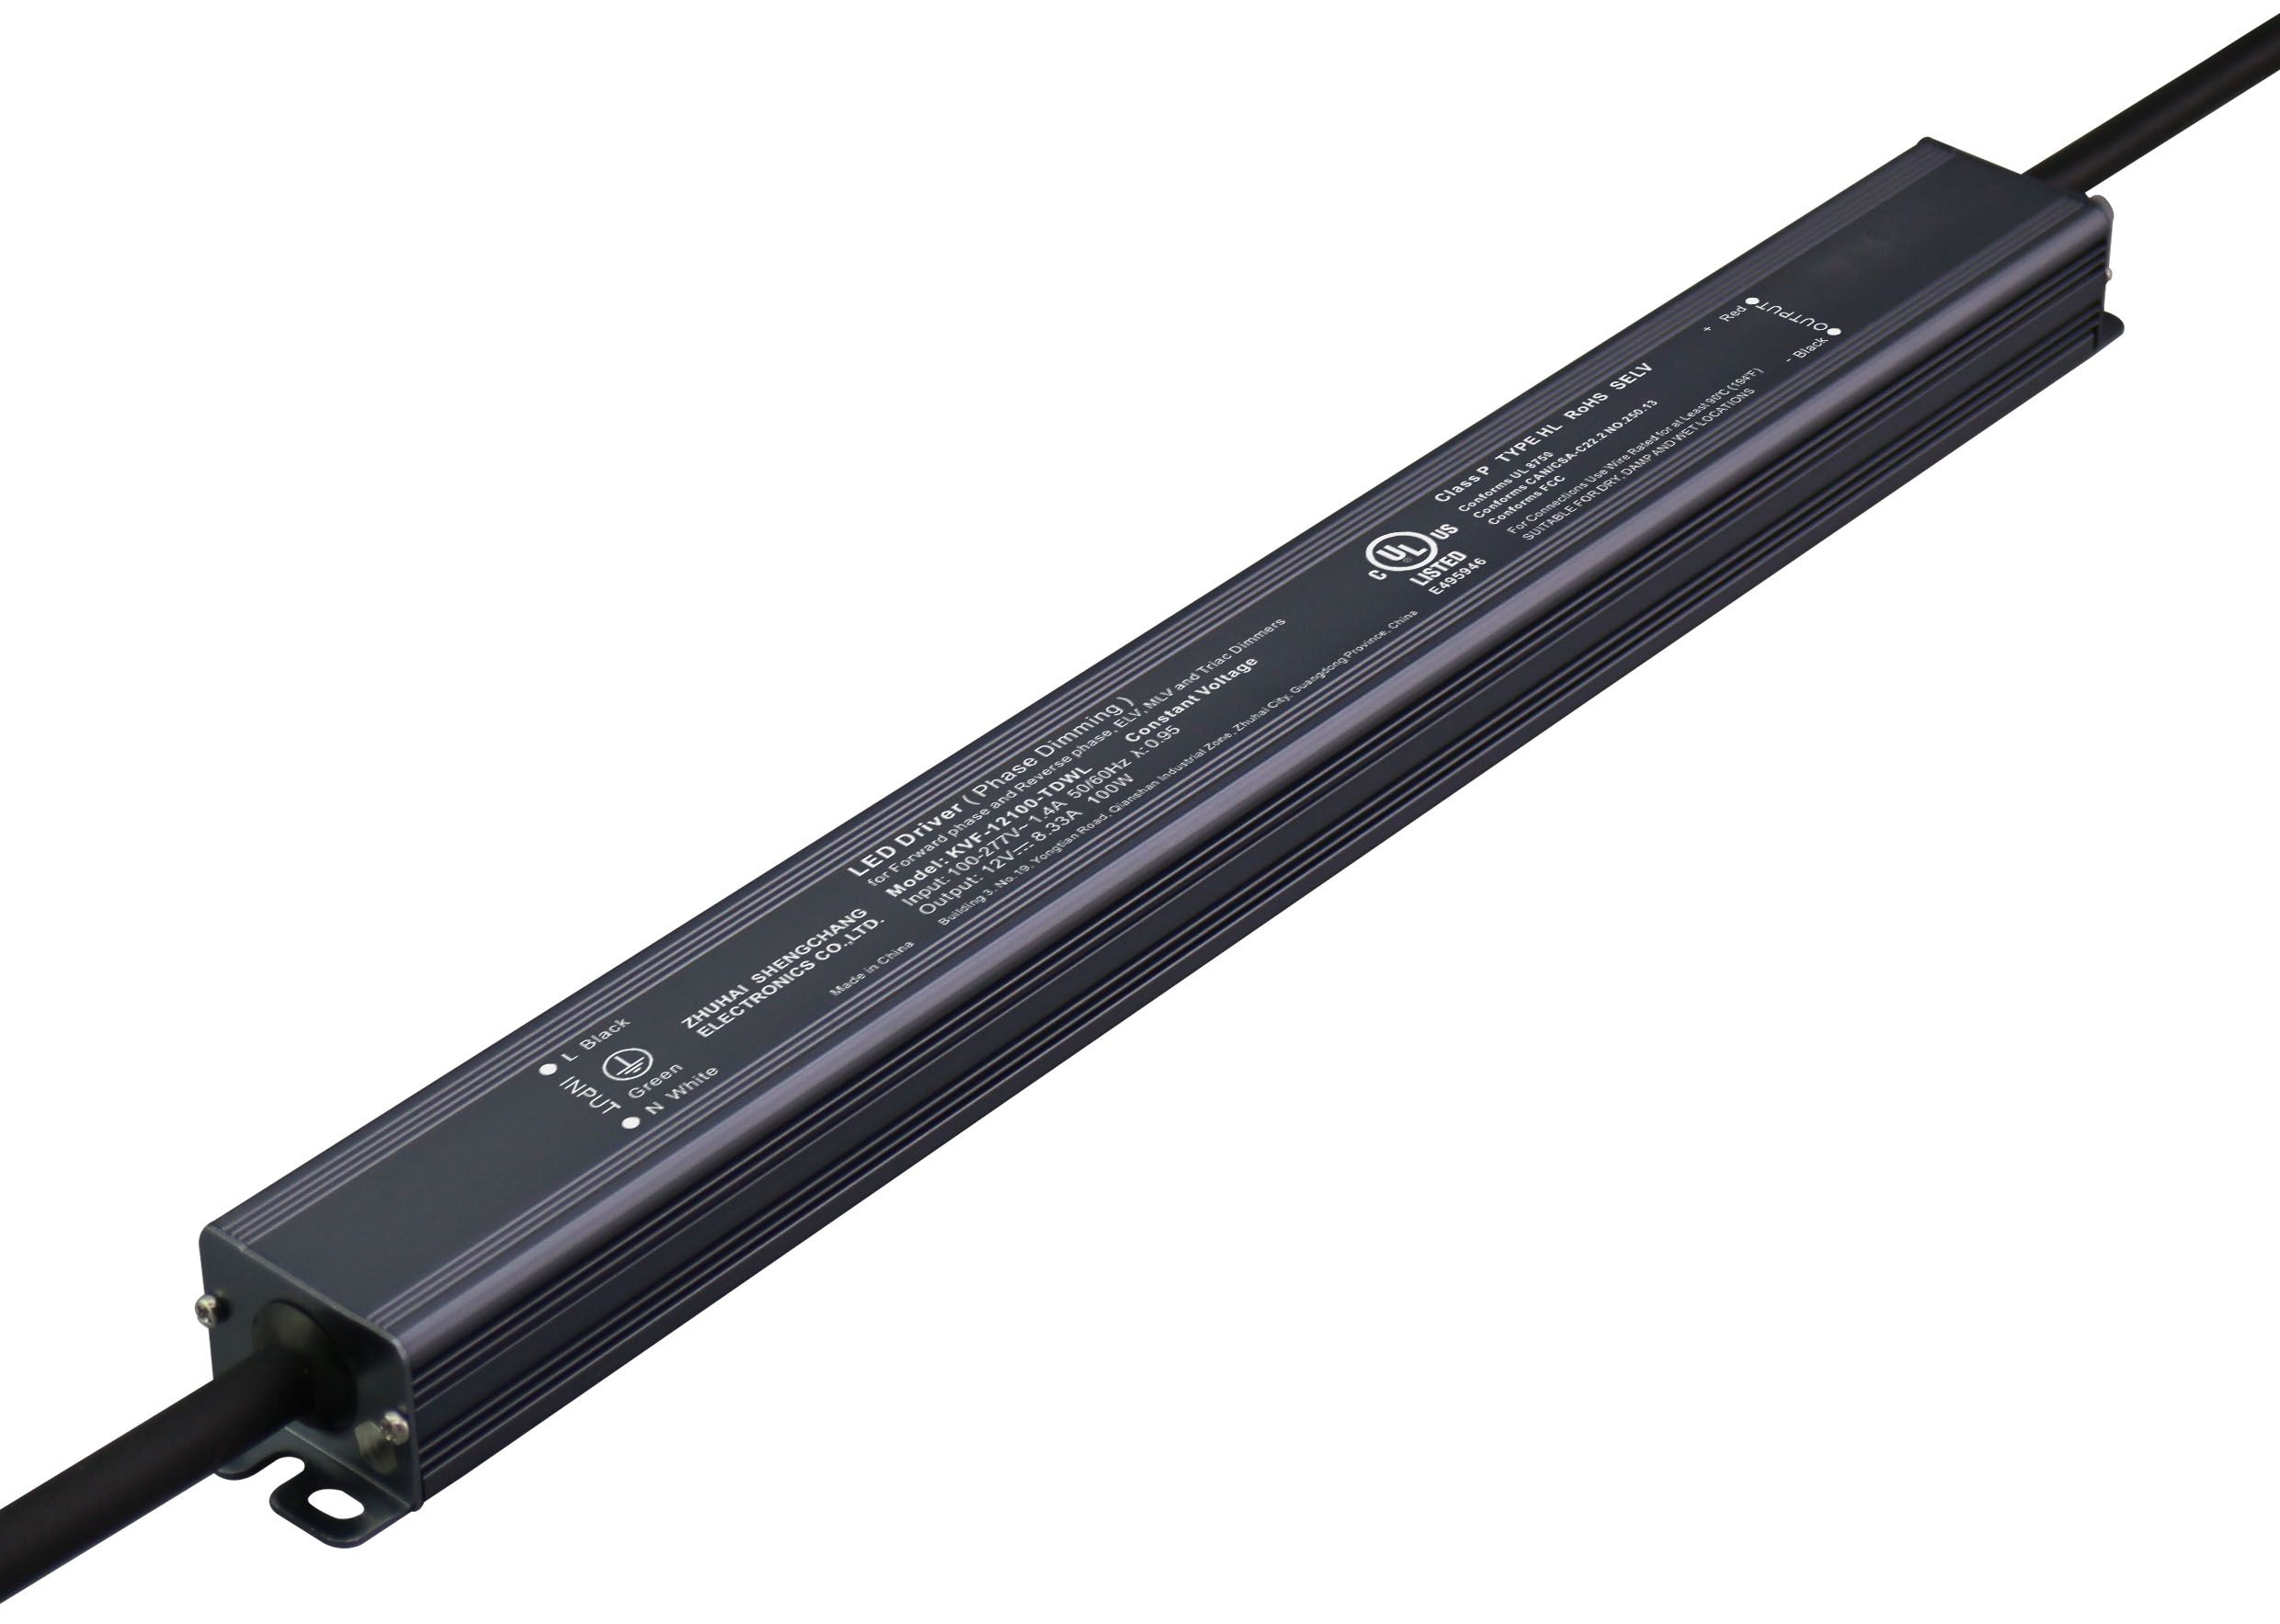 KVF-TDWL Series 96W Constant Voltage Triac Dimmable LED driver